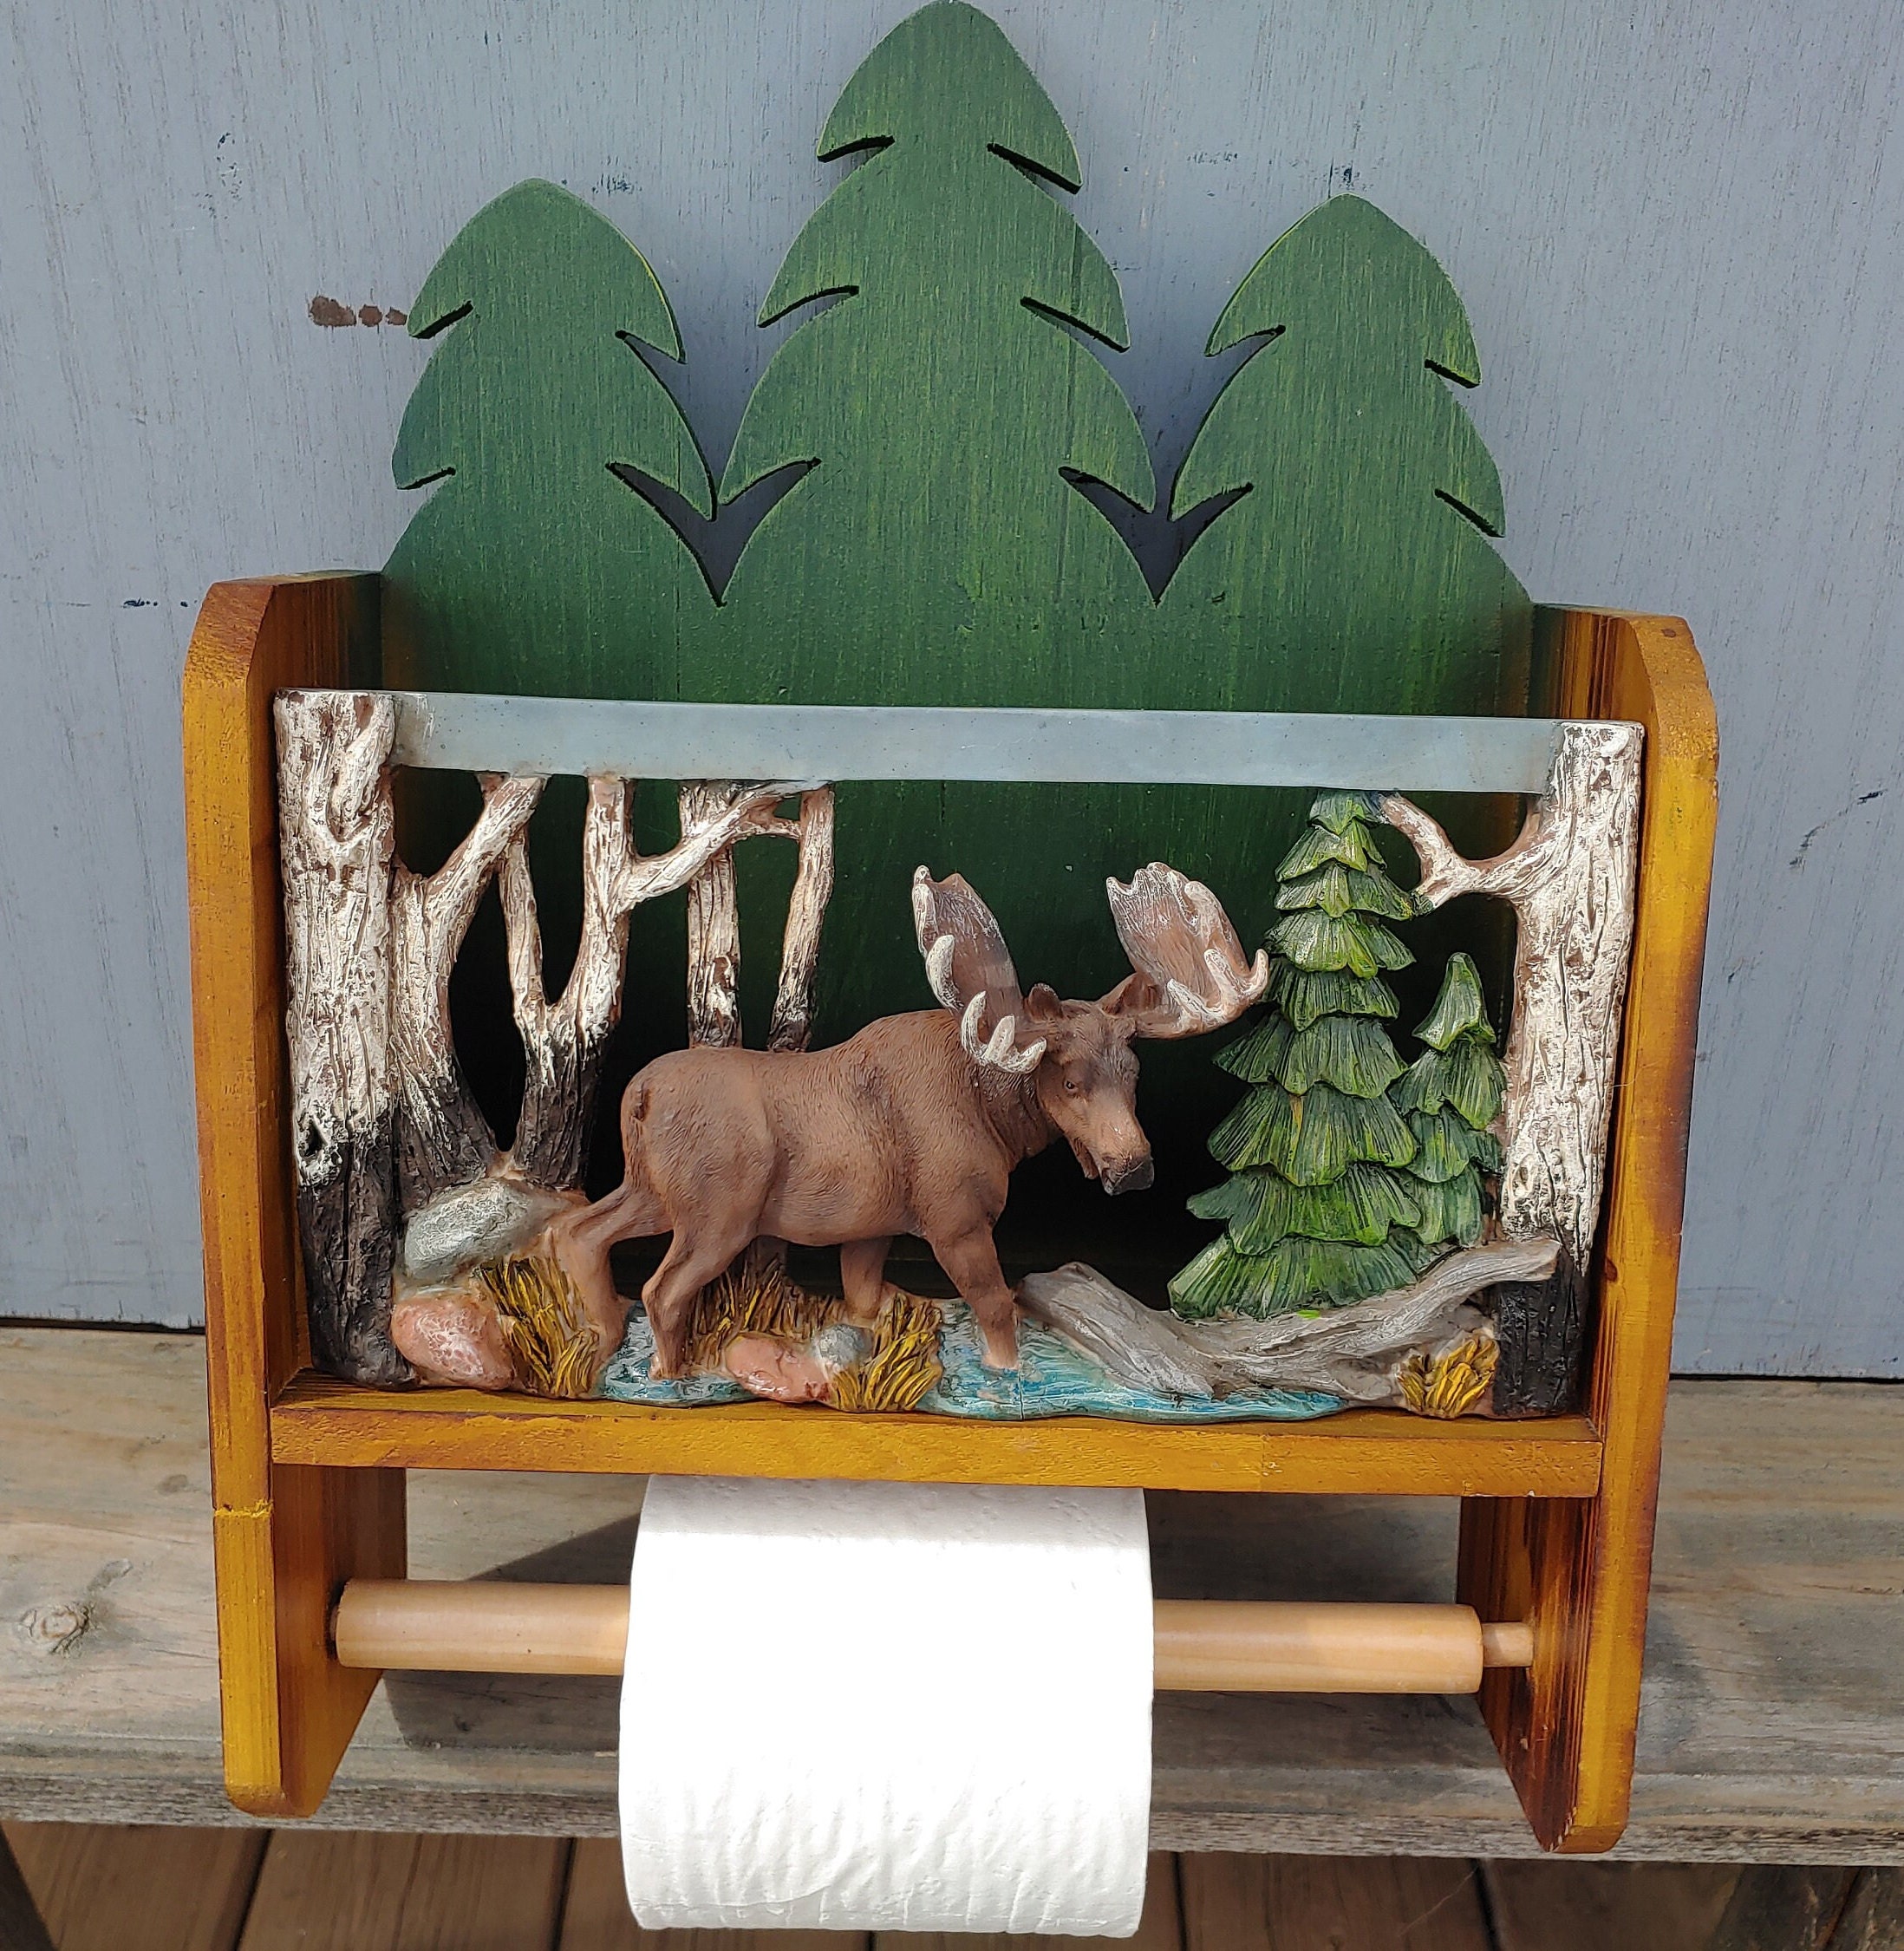 Wood Bathroom Accessory Set: Towel Holder, Wall Frame and Toilet Paper  Holder - Cabin/Lodge/Rustic - Small